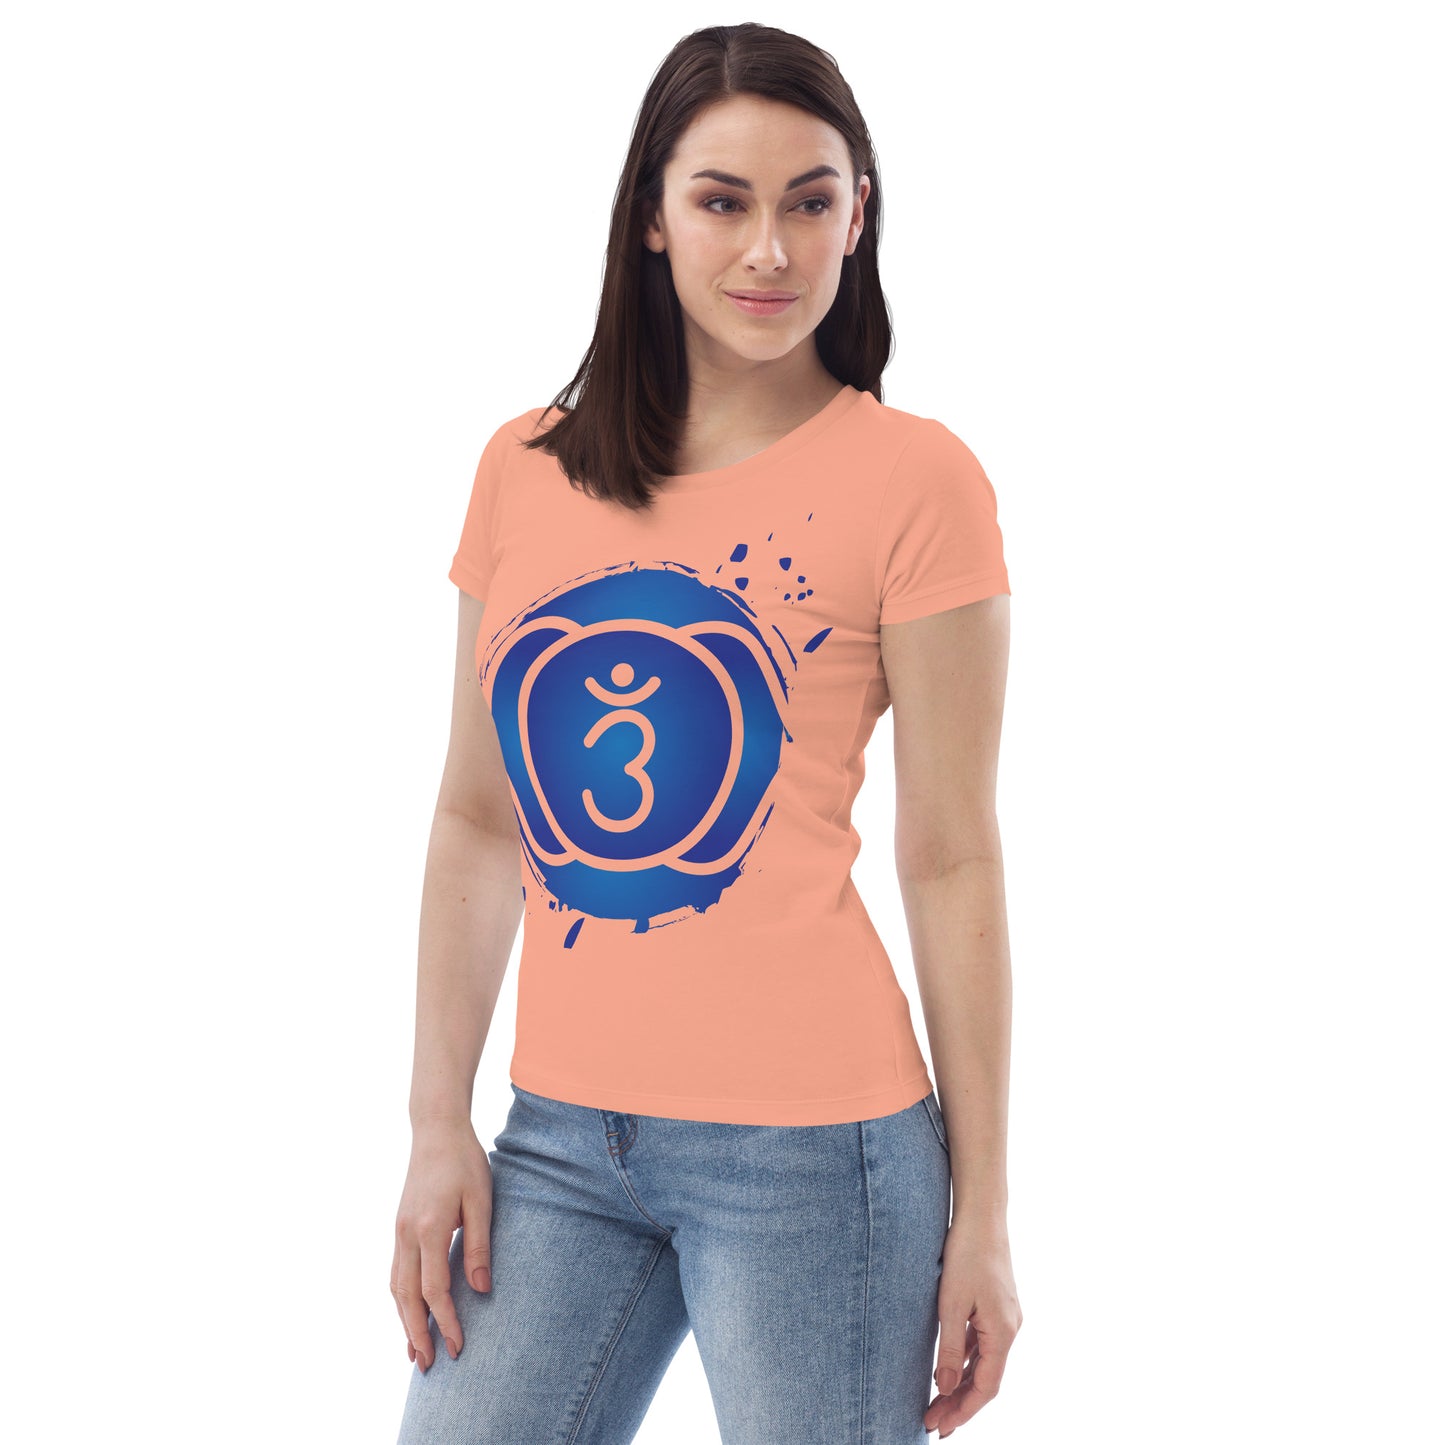 Women's fitted eco tee S-2XL | Ajna chakra